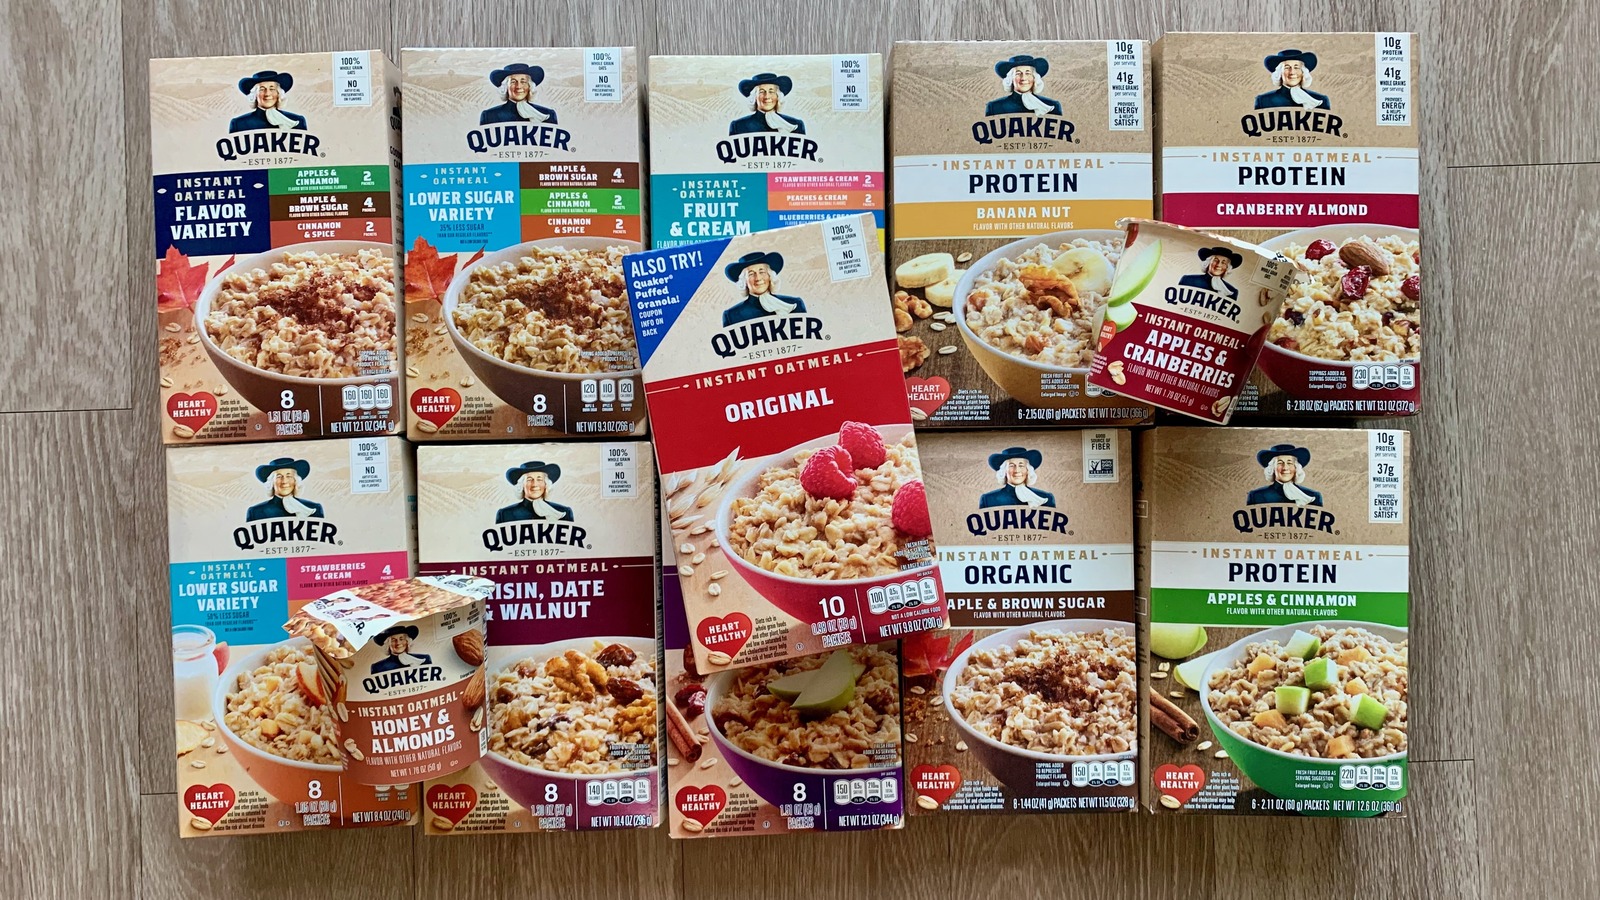 13 Quaker Oats Flavors, Ranked Worst To Best, 46% OFF